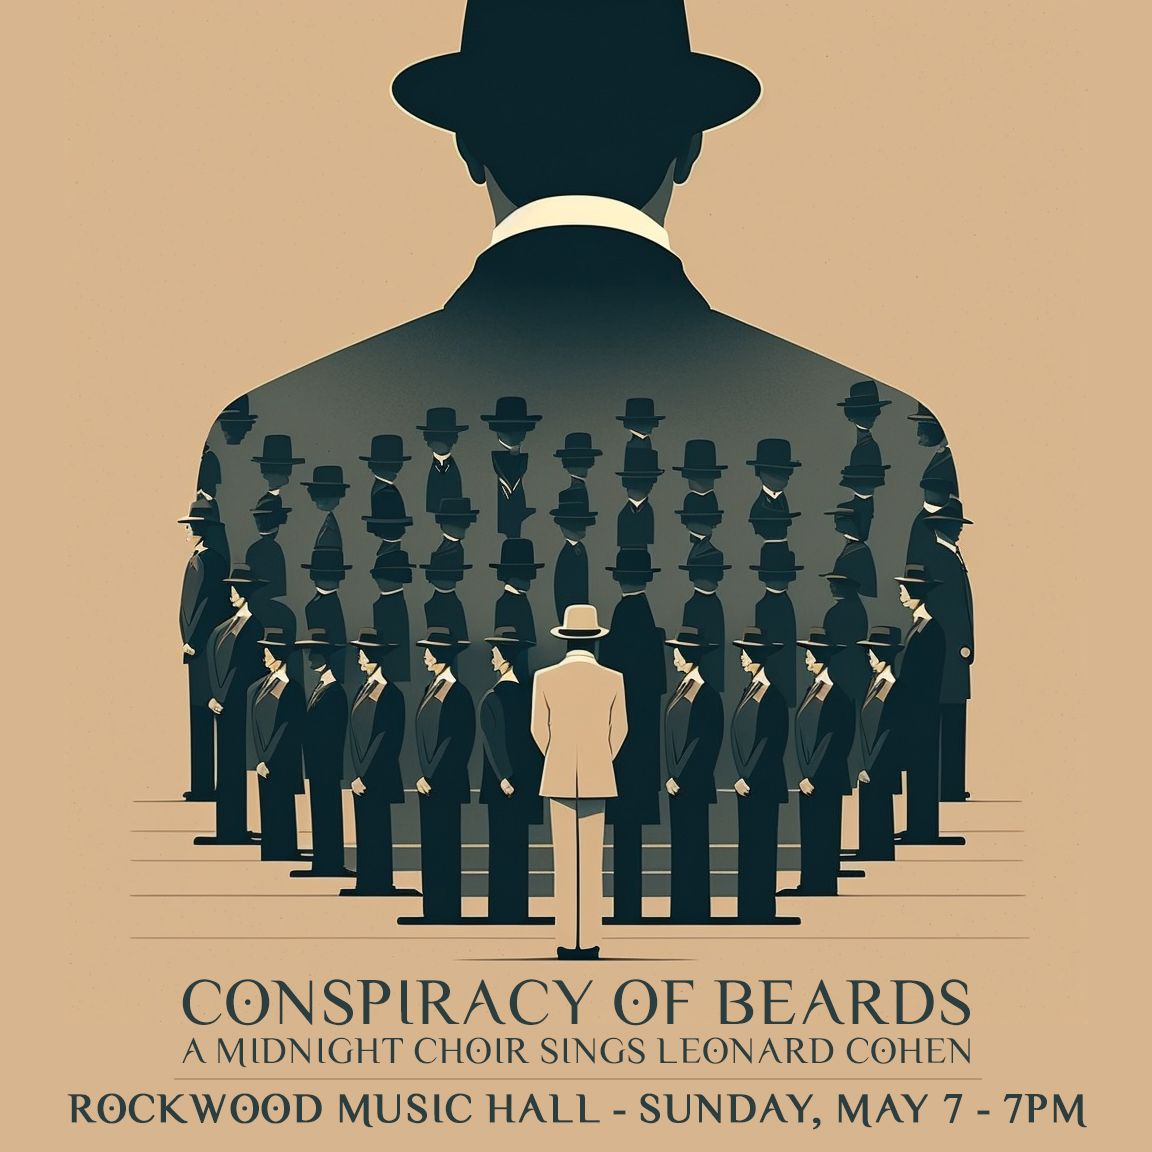 Conspiracy of Beards at Rockwood Music Hall